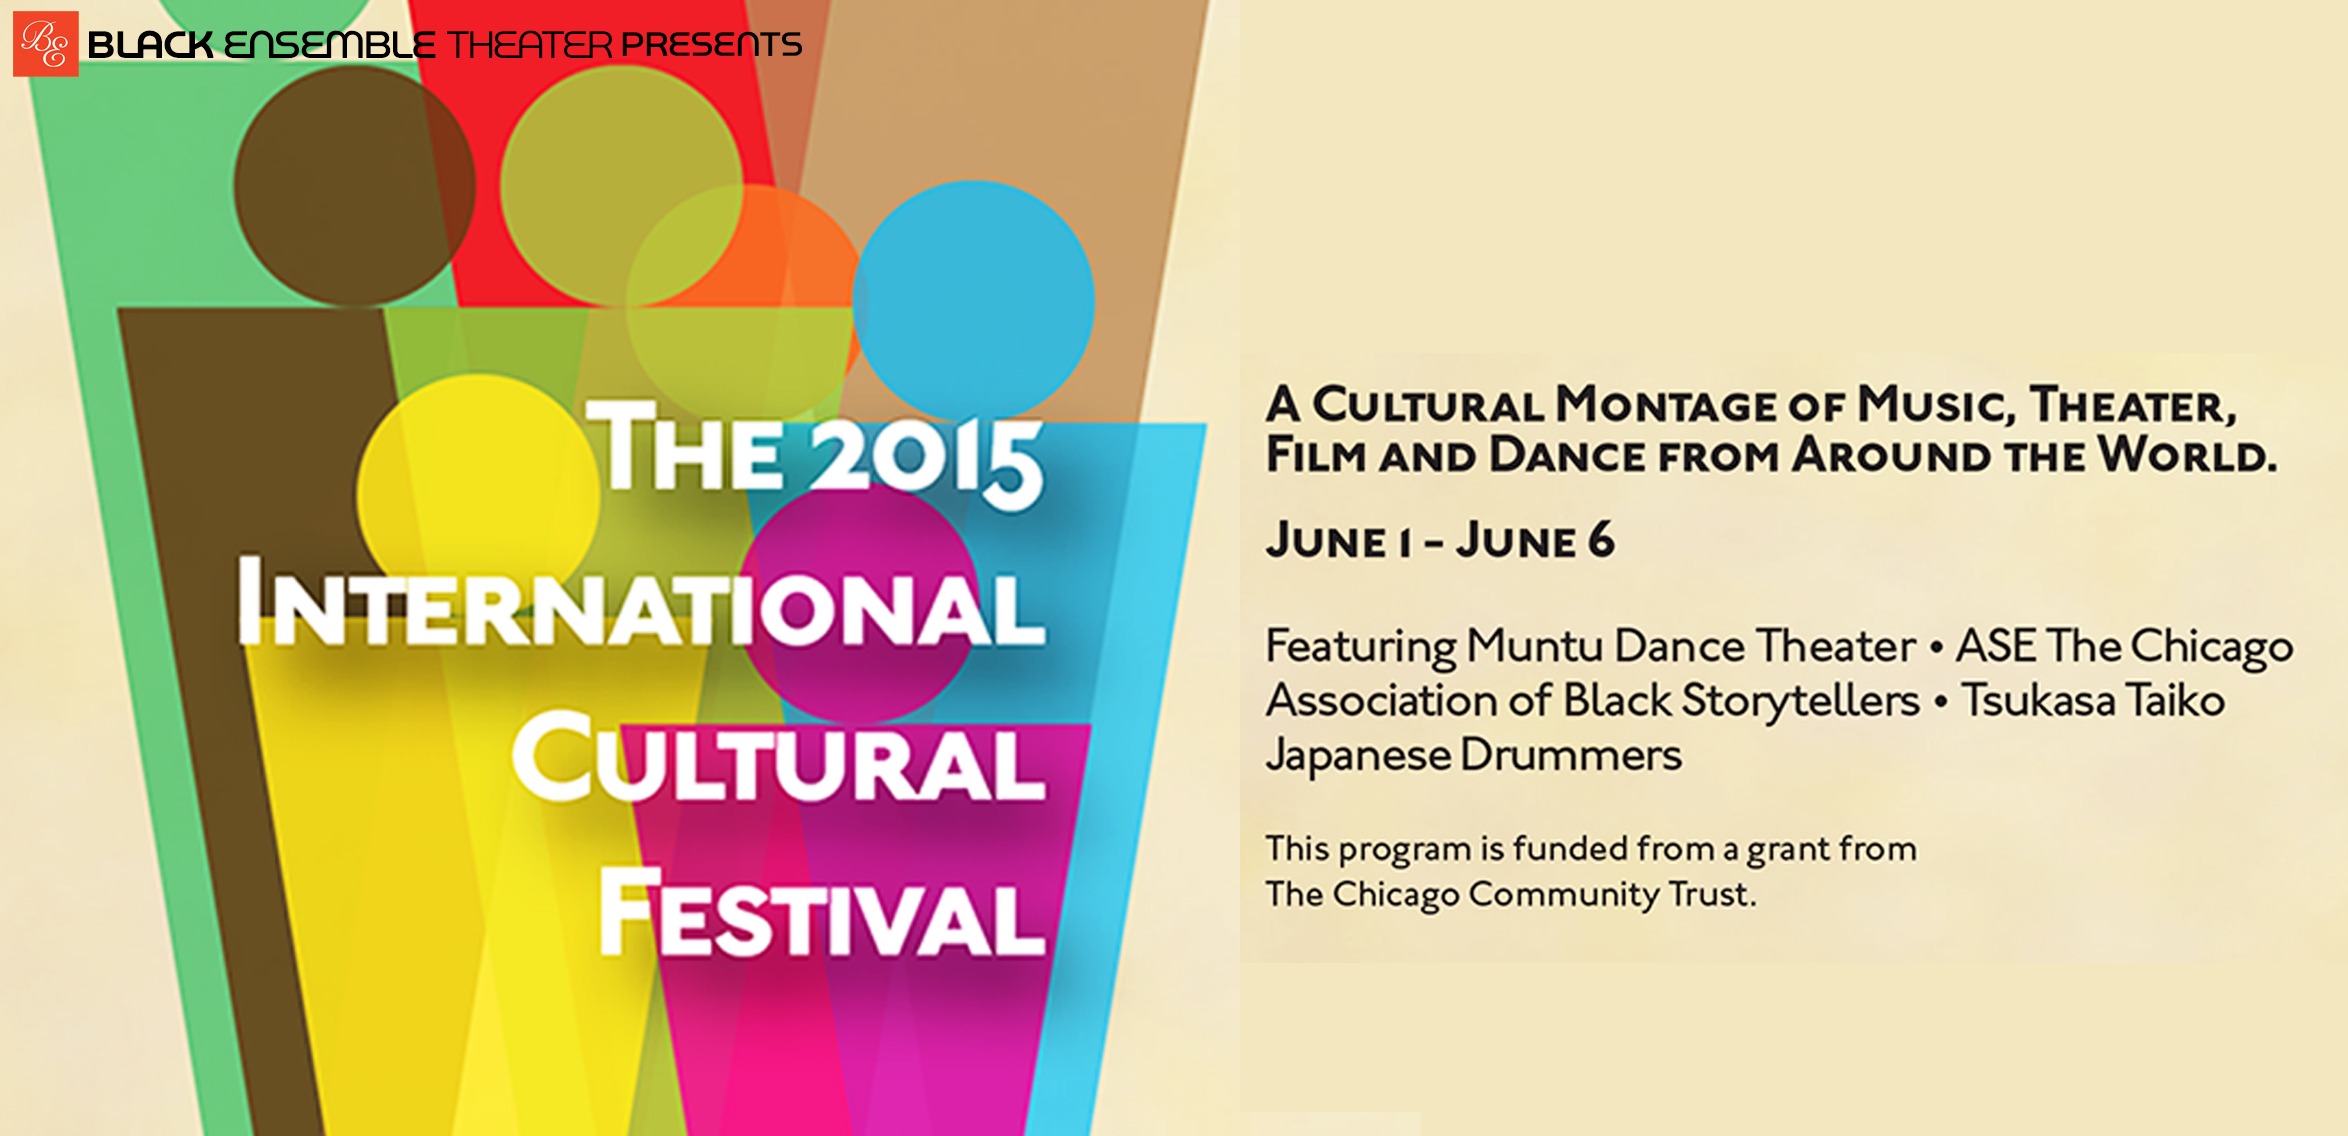 Black Ensemble Theater presents the first annual International Cultural Festival June 1-June 6, 2015 1 Black Ensemble Theater Founder and CEO Jackie Taylor is proud to announce the first annual International Cultural Festival, June 1-June 6, 2015.  The week-long cultural festival of music, theater, film, and dance from around the world is produced by the Black Ensemble Theater, and will take place at the Black Ensemble Cultural Center, 4450 N. Clark Street. 